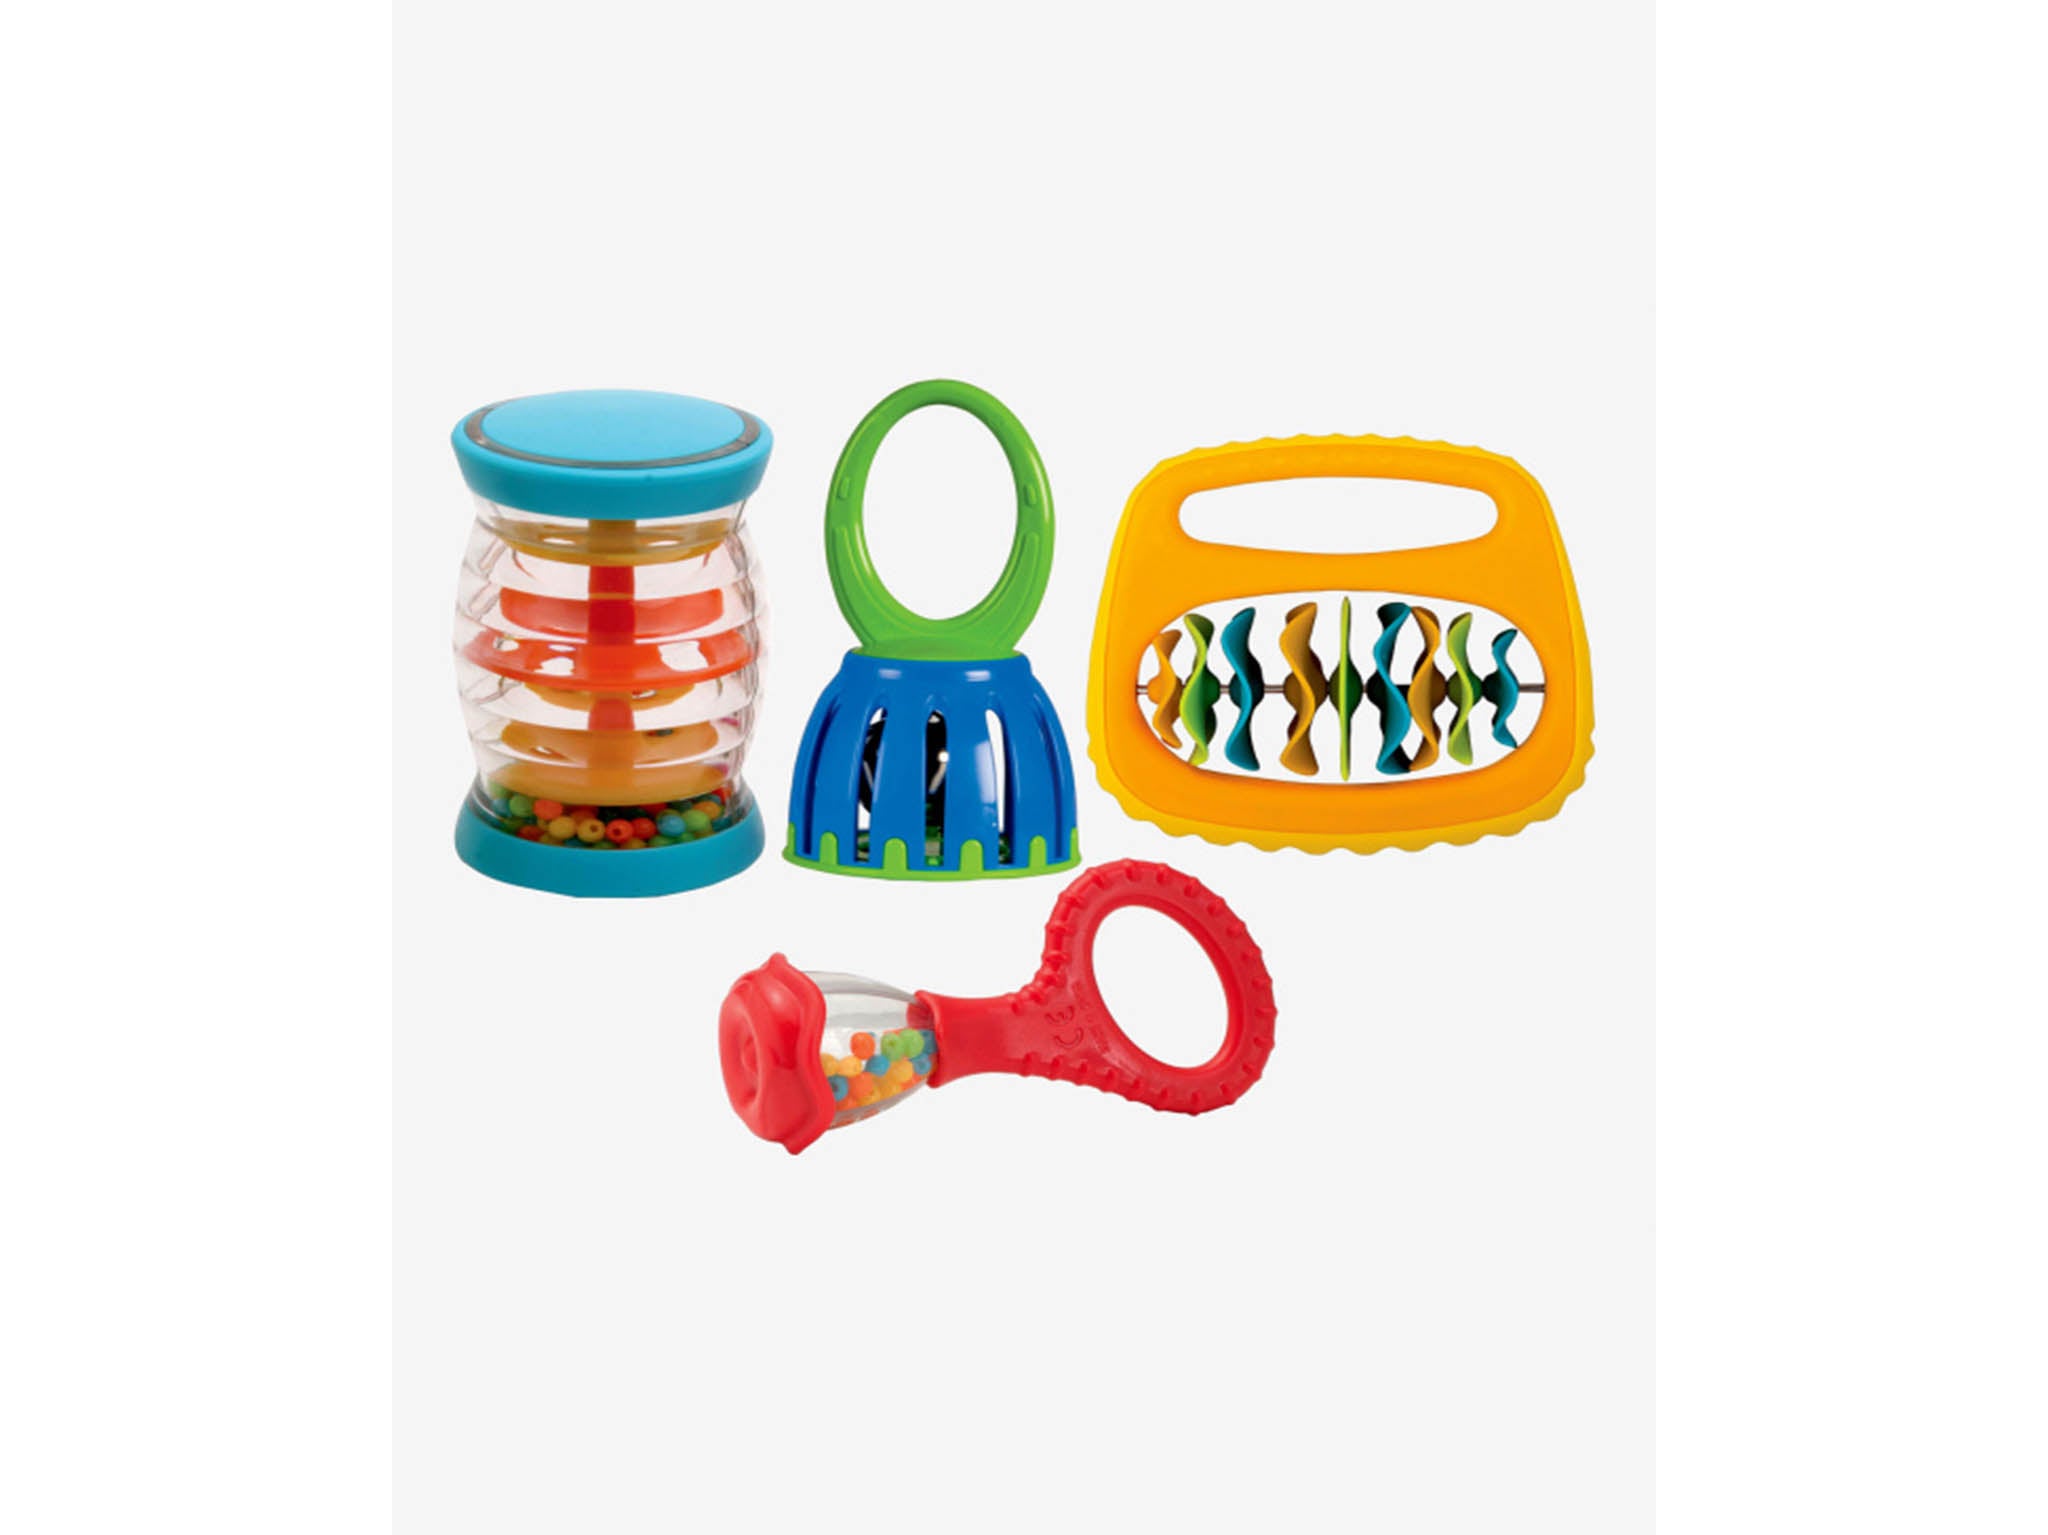 Get everyone dancing with this colourful kids’ band set